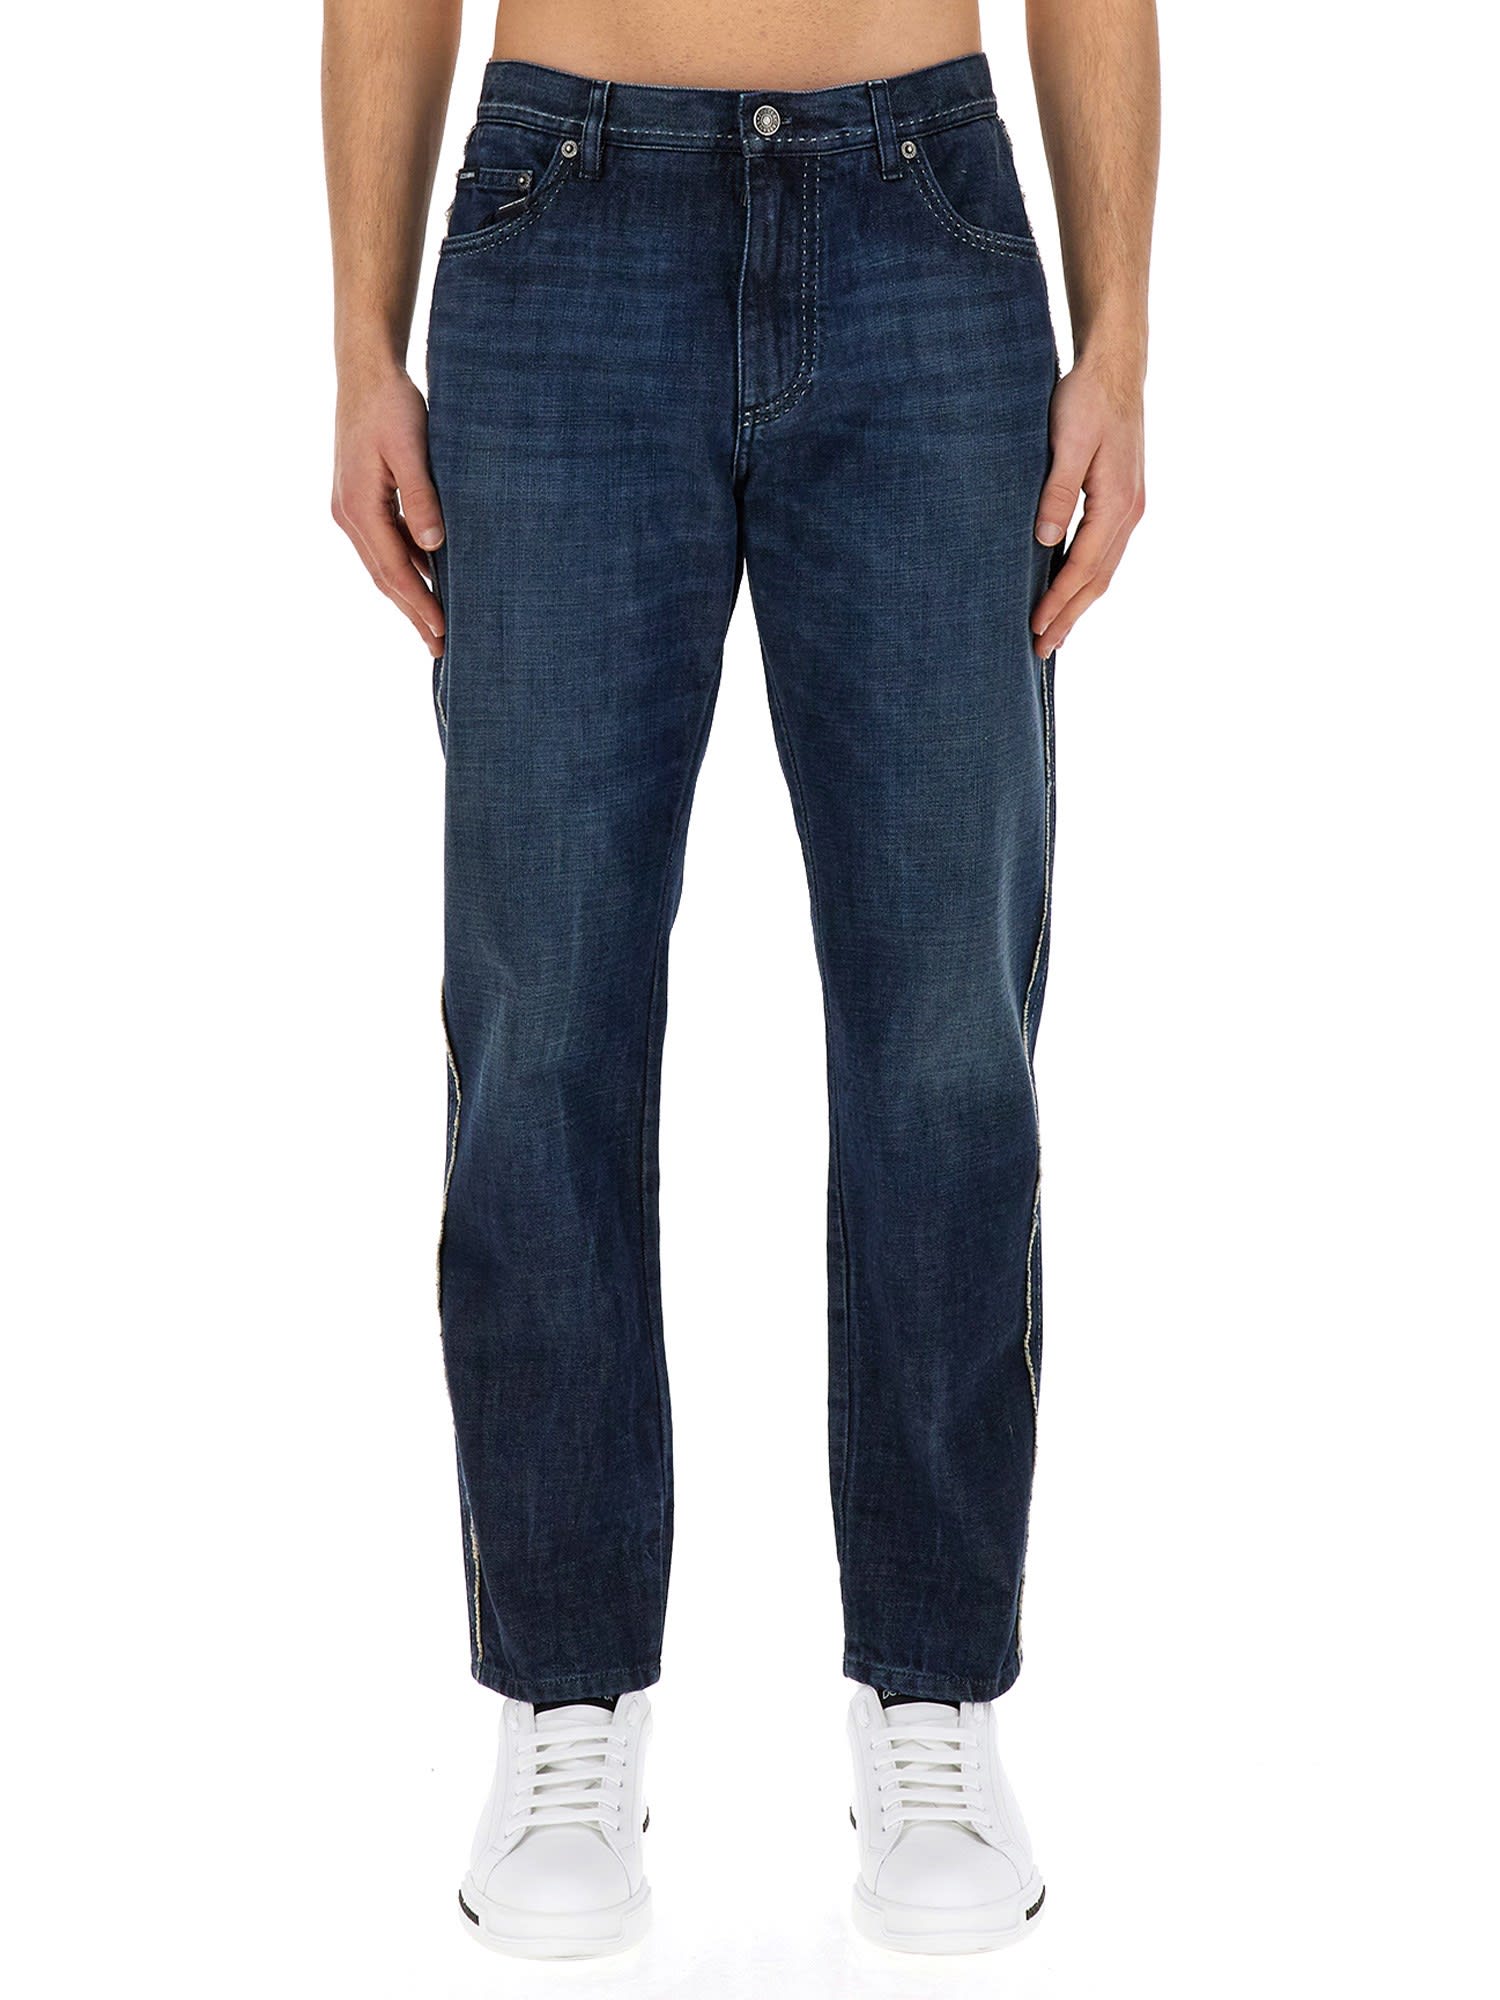 DOLCE & GABBANA LOOSE FIT JEANS